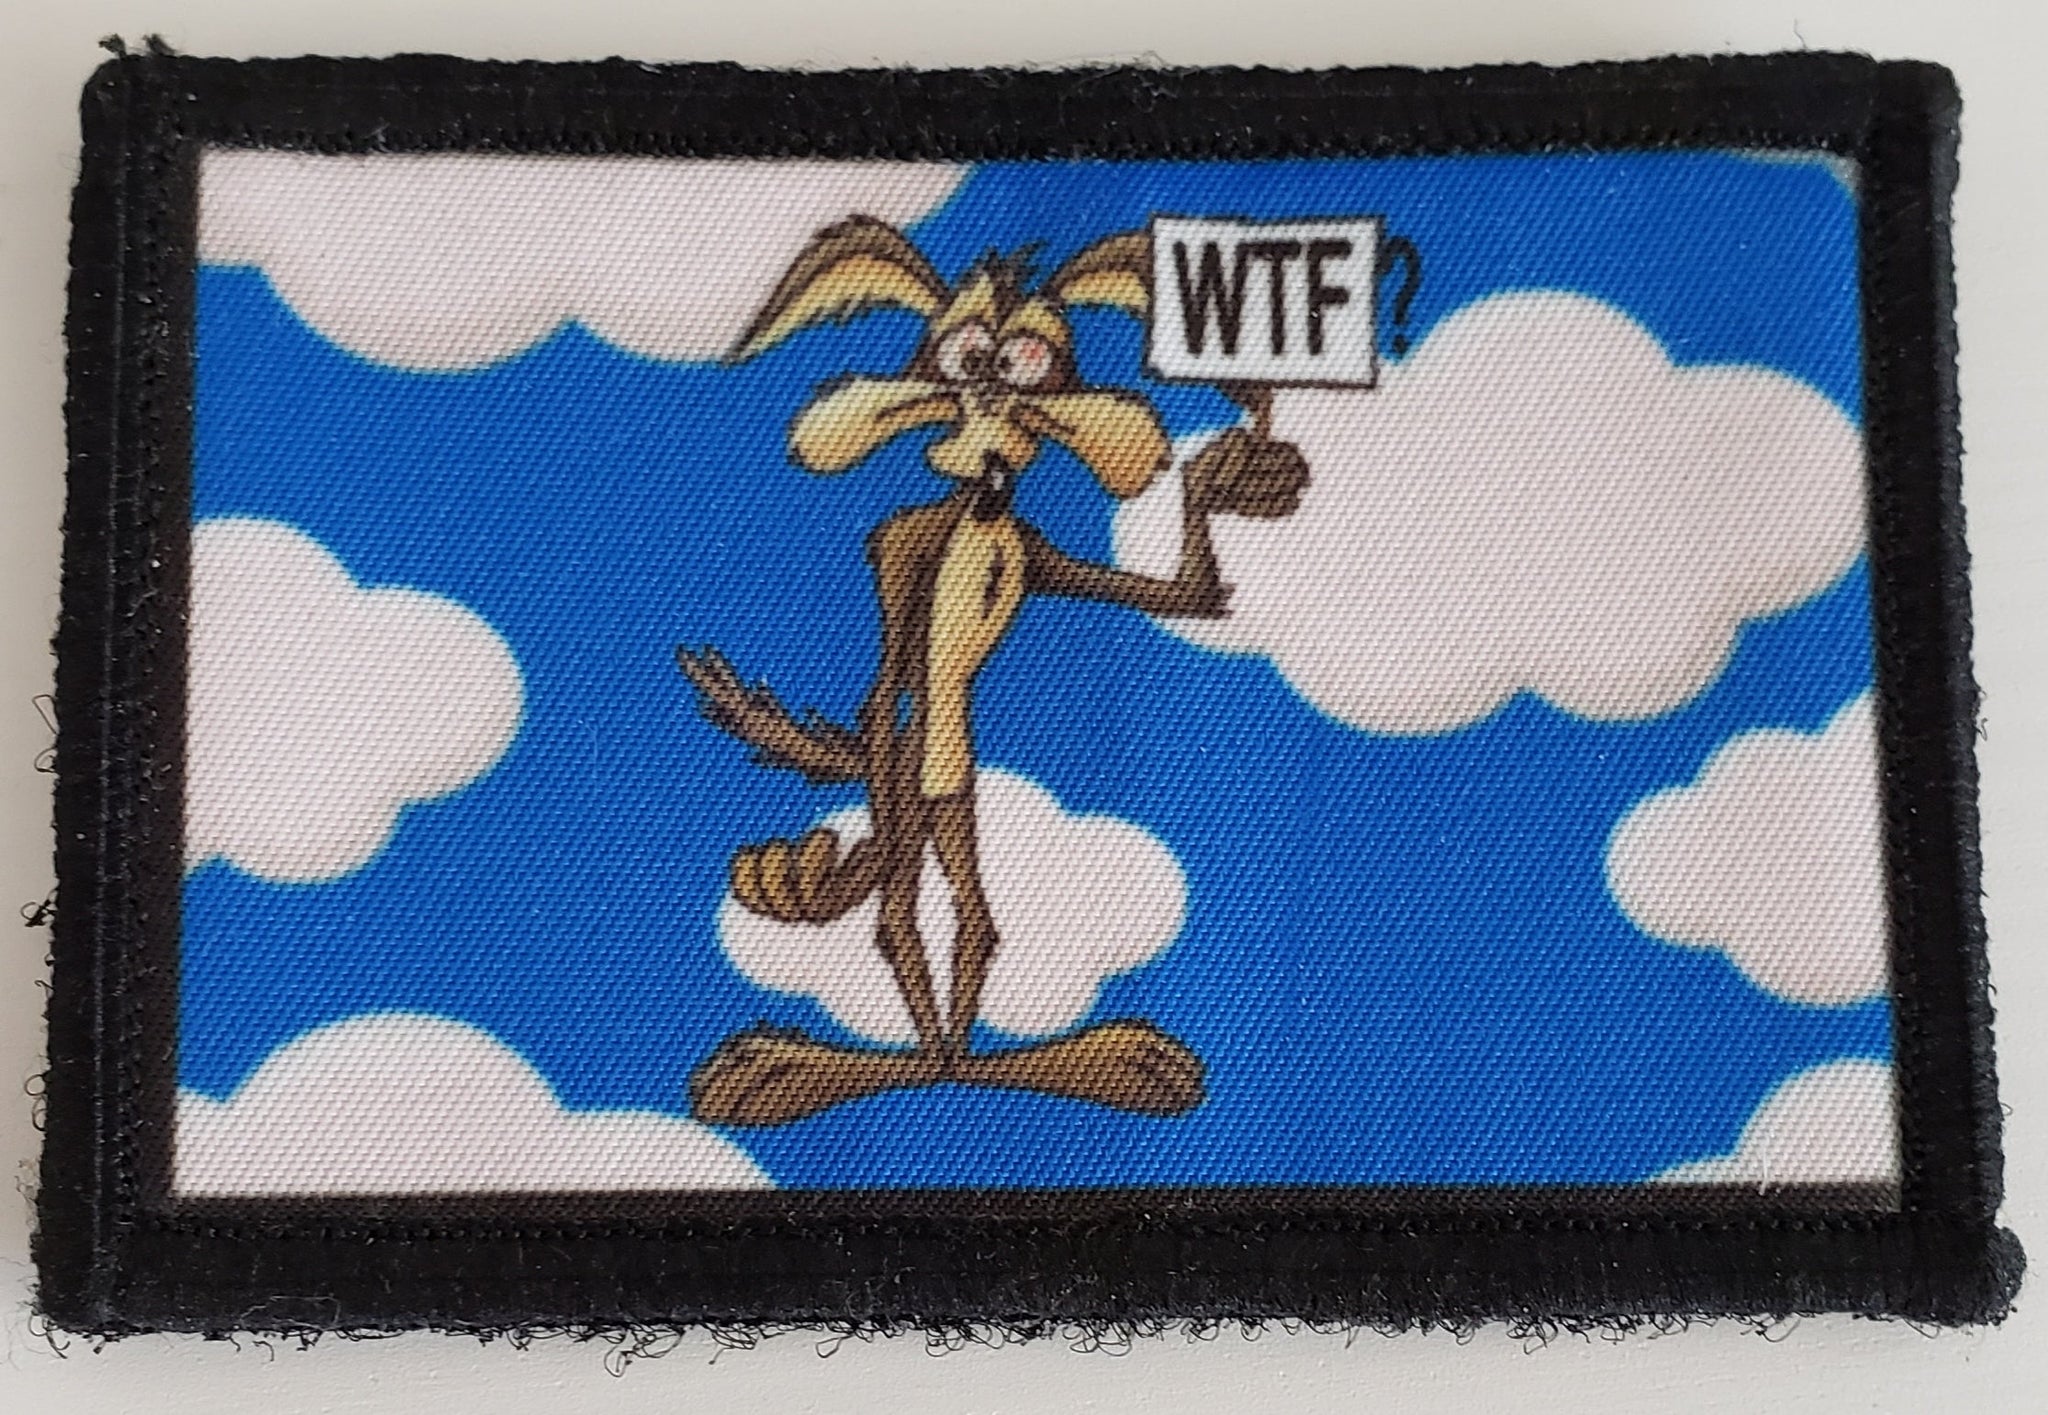 Wile E. Coyote WTF Morale Patch Morale Patches Redheaded T Shirts 